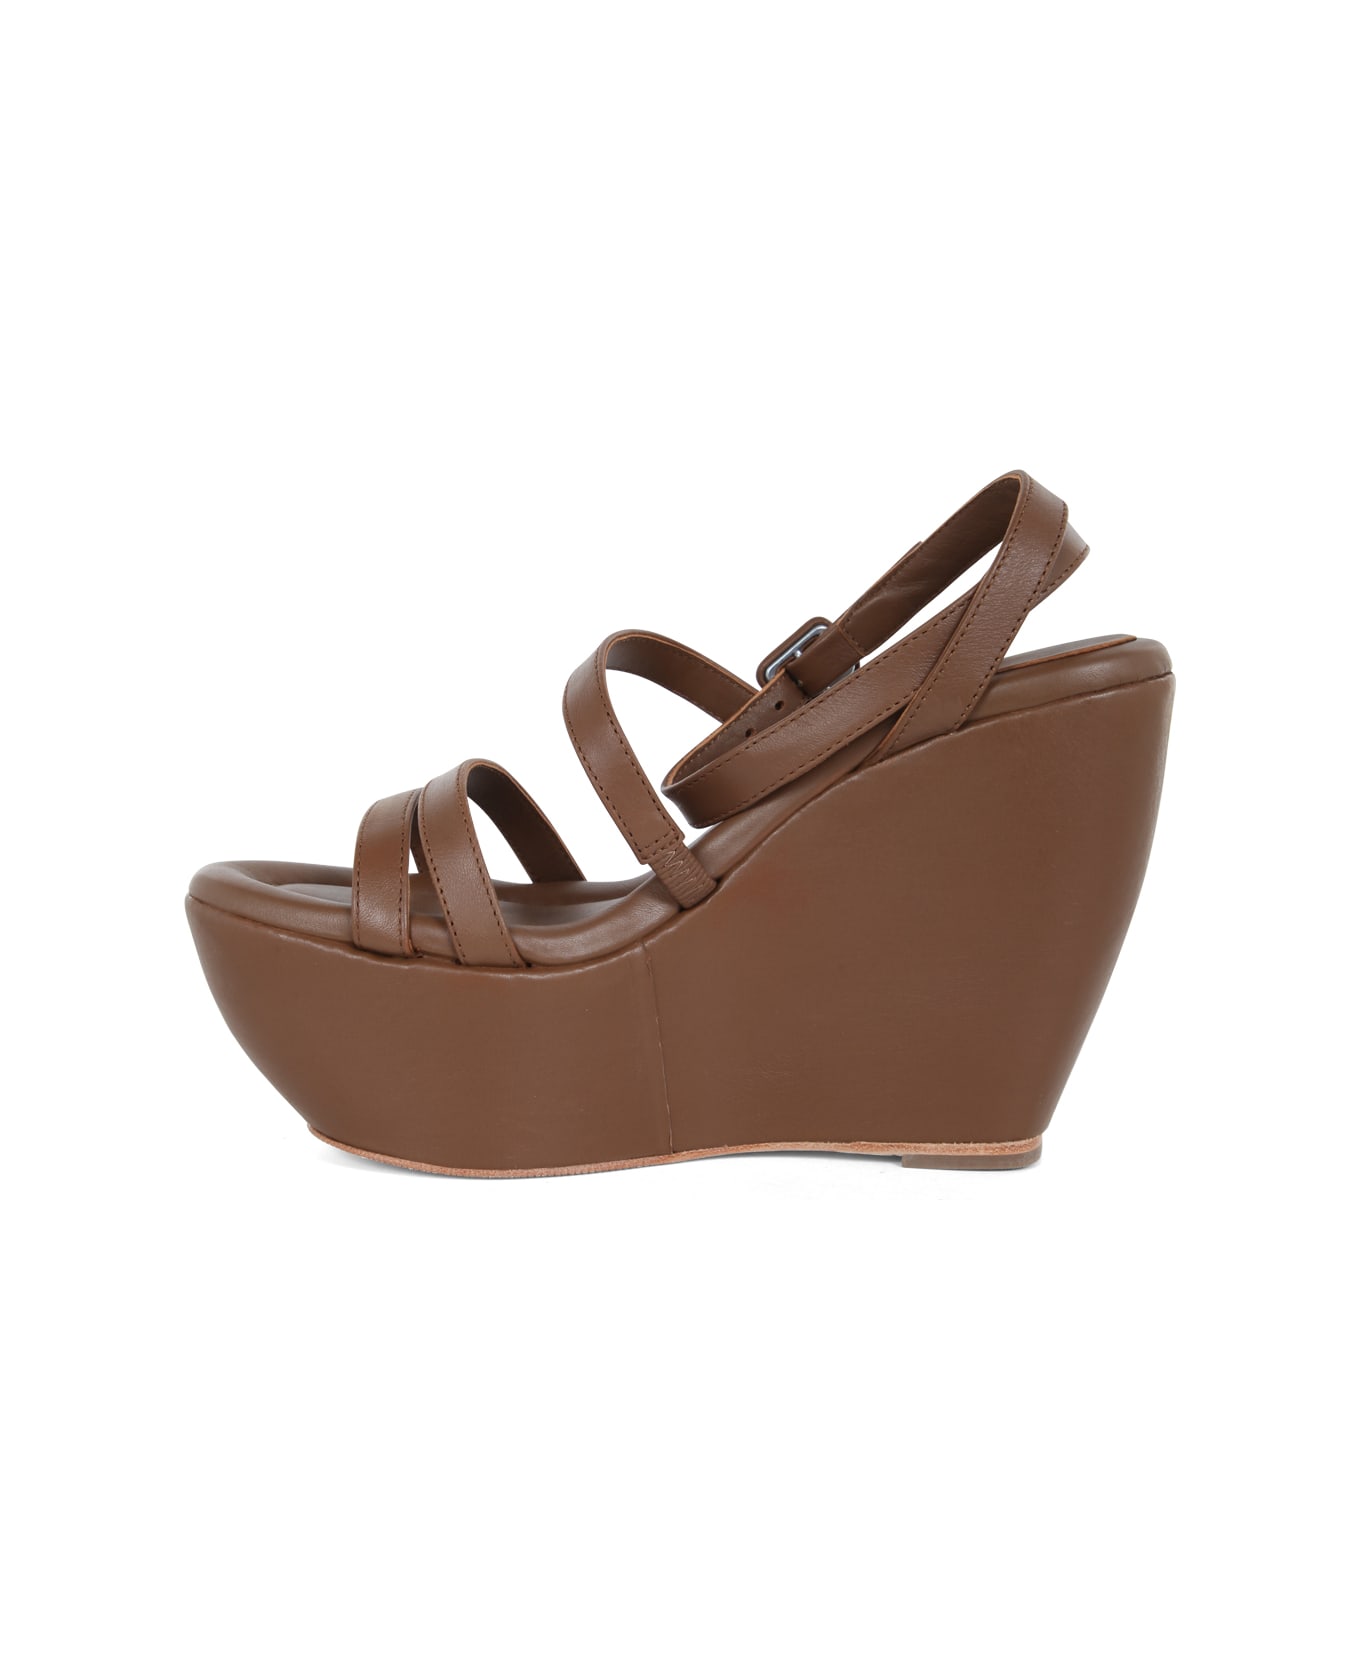 Paloma Barceló Iraide Wedge Sandals With Ankle Bands - Hazelnut